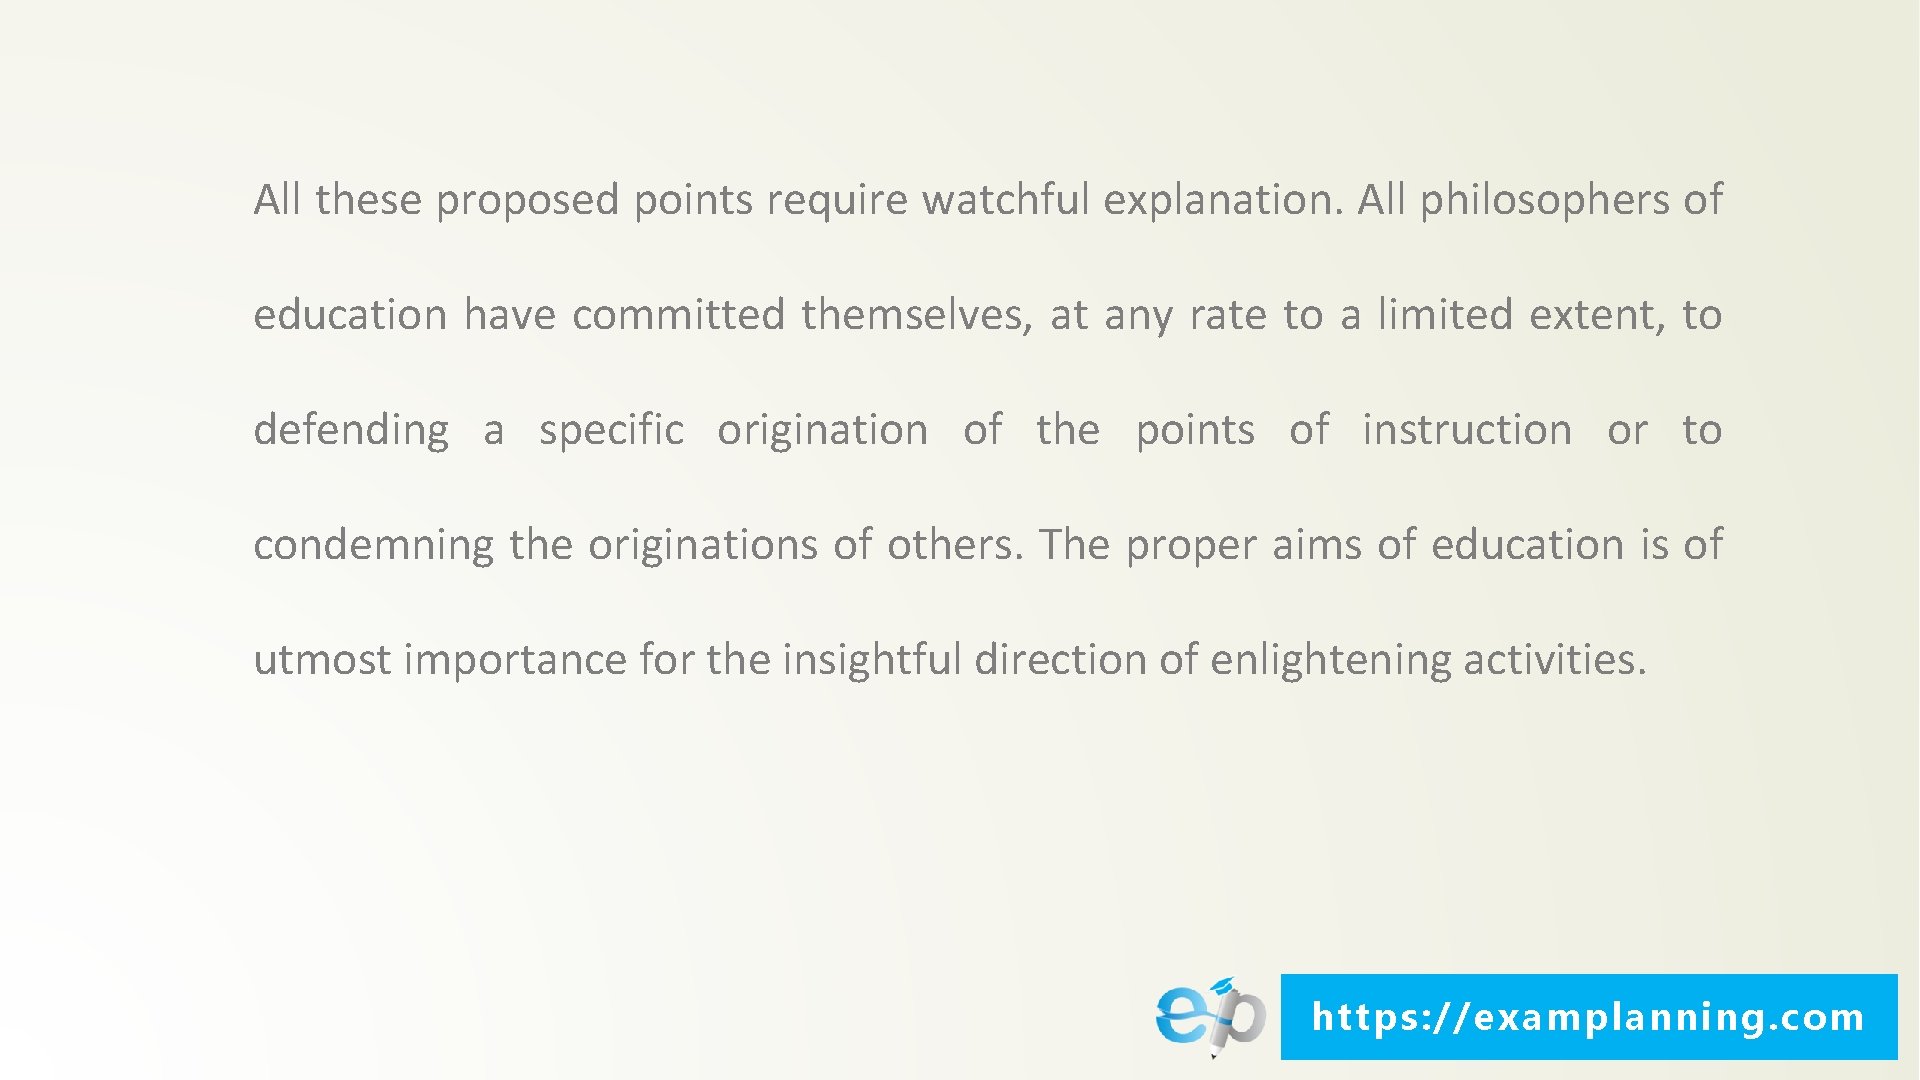 All these proposed points require watchful explanation. All philosophers of education have committed themselves,